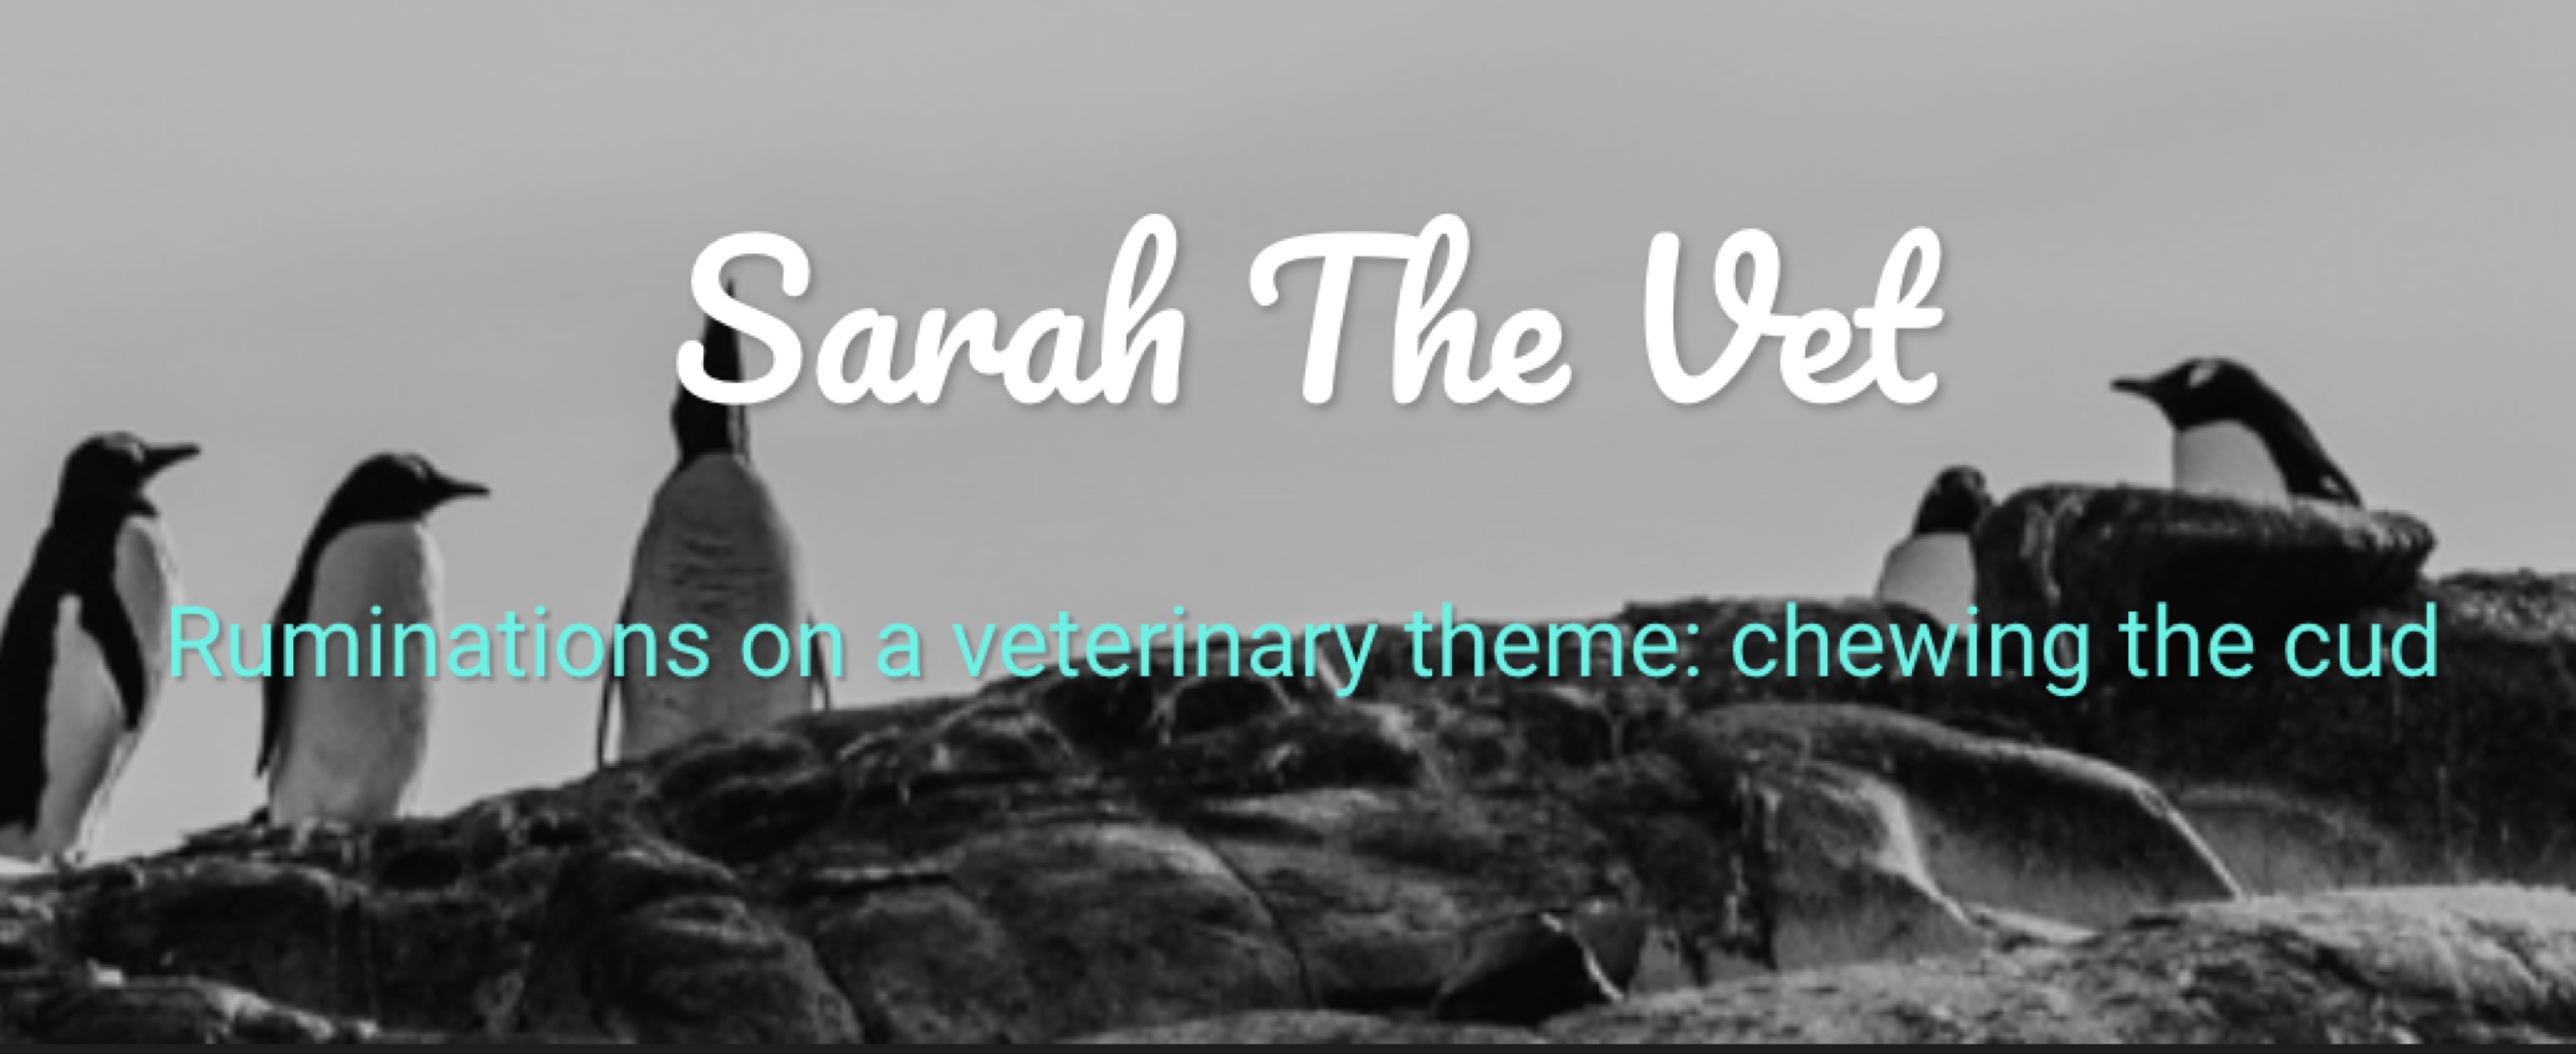 Image from cover of www.sarahthevet.com website. 